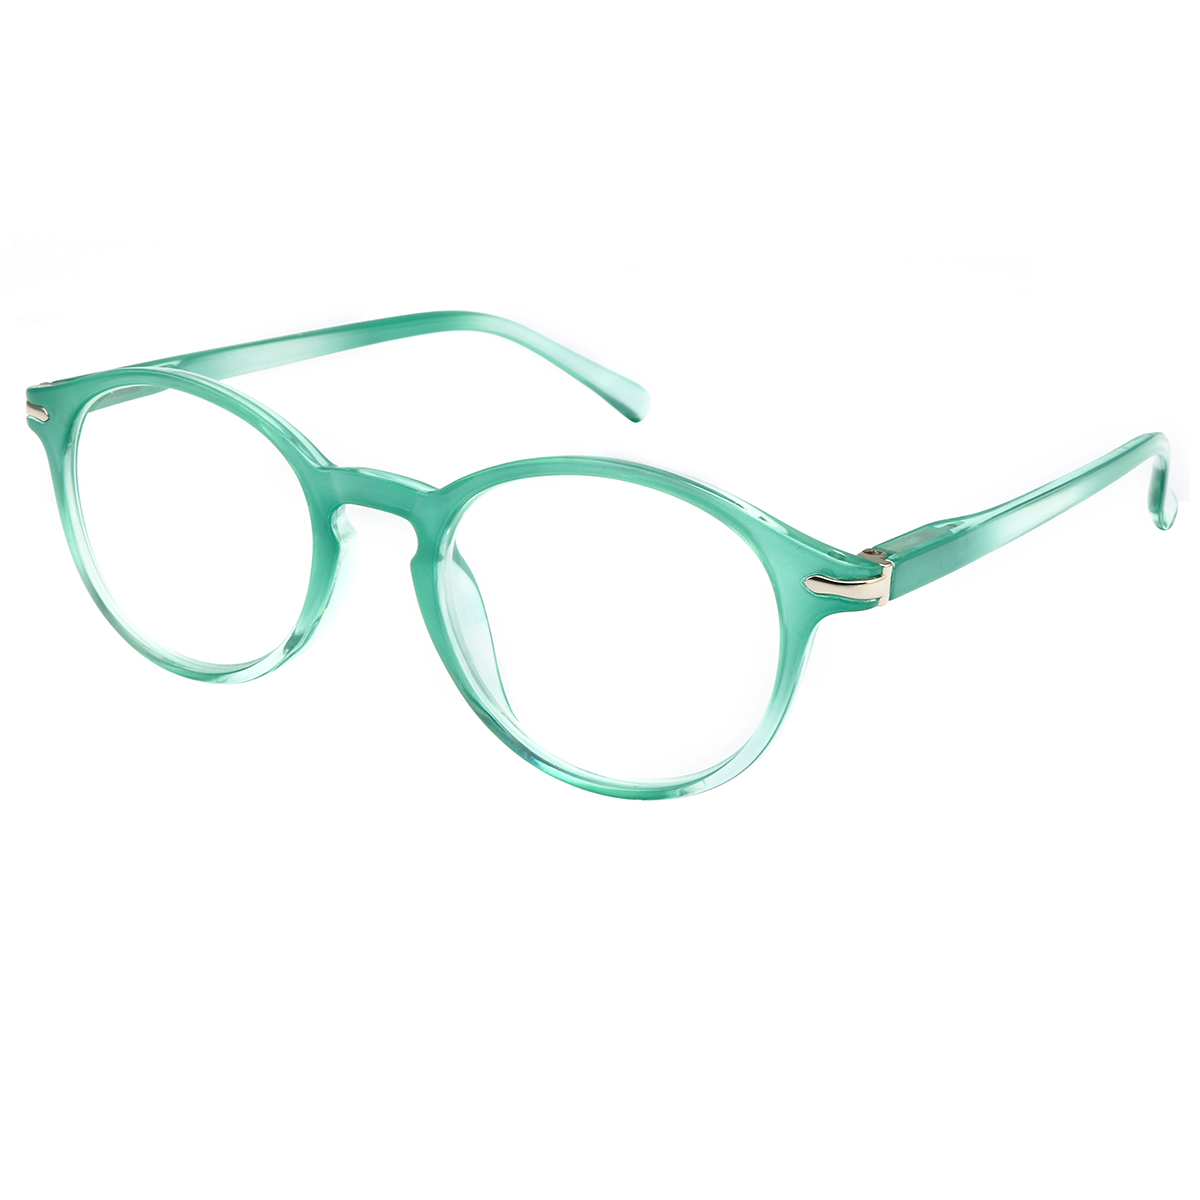 Gallaecia - Oval Green Reading Glasses for Women